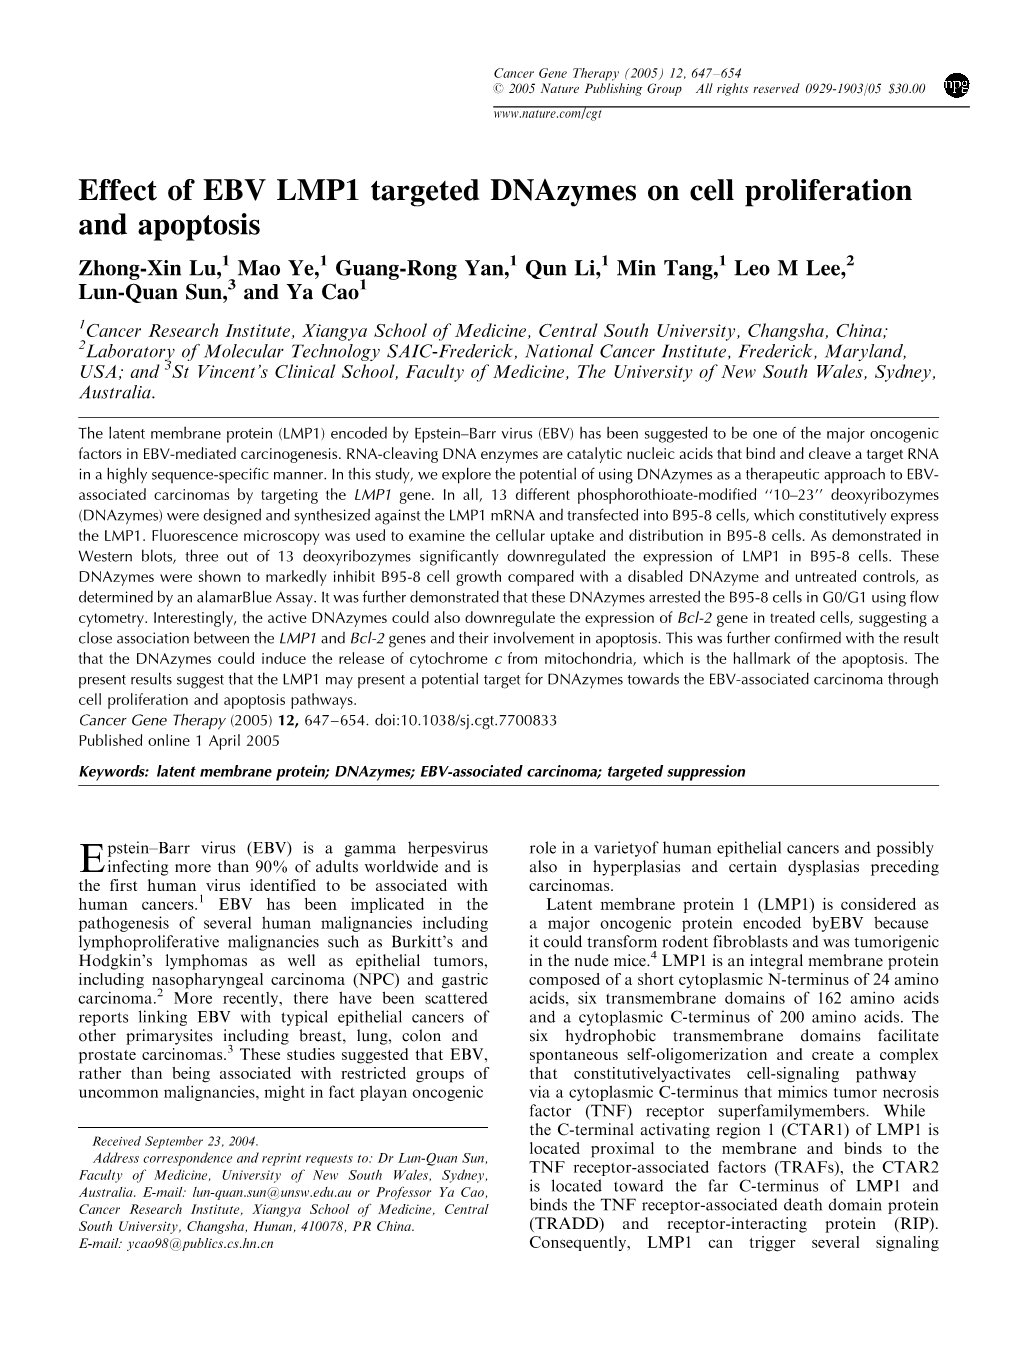 Effect of EBV LMP1 Targeted Dnazymes on Cell Proliferation And